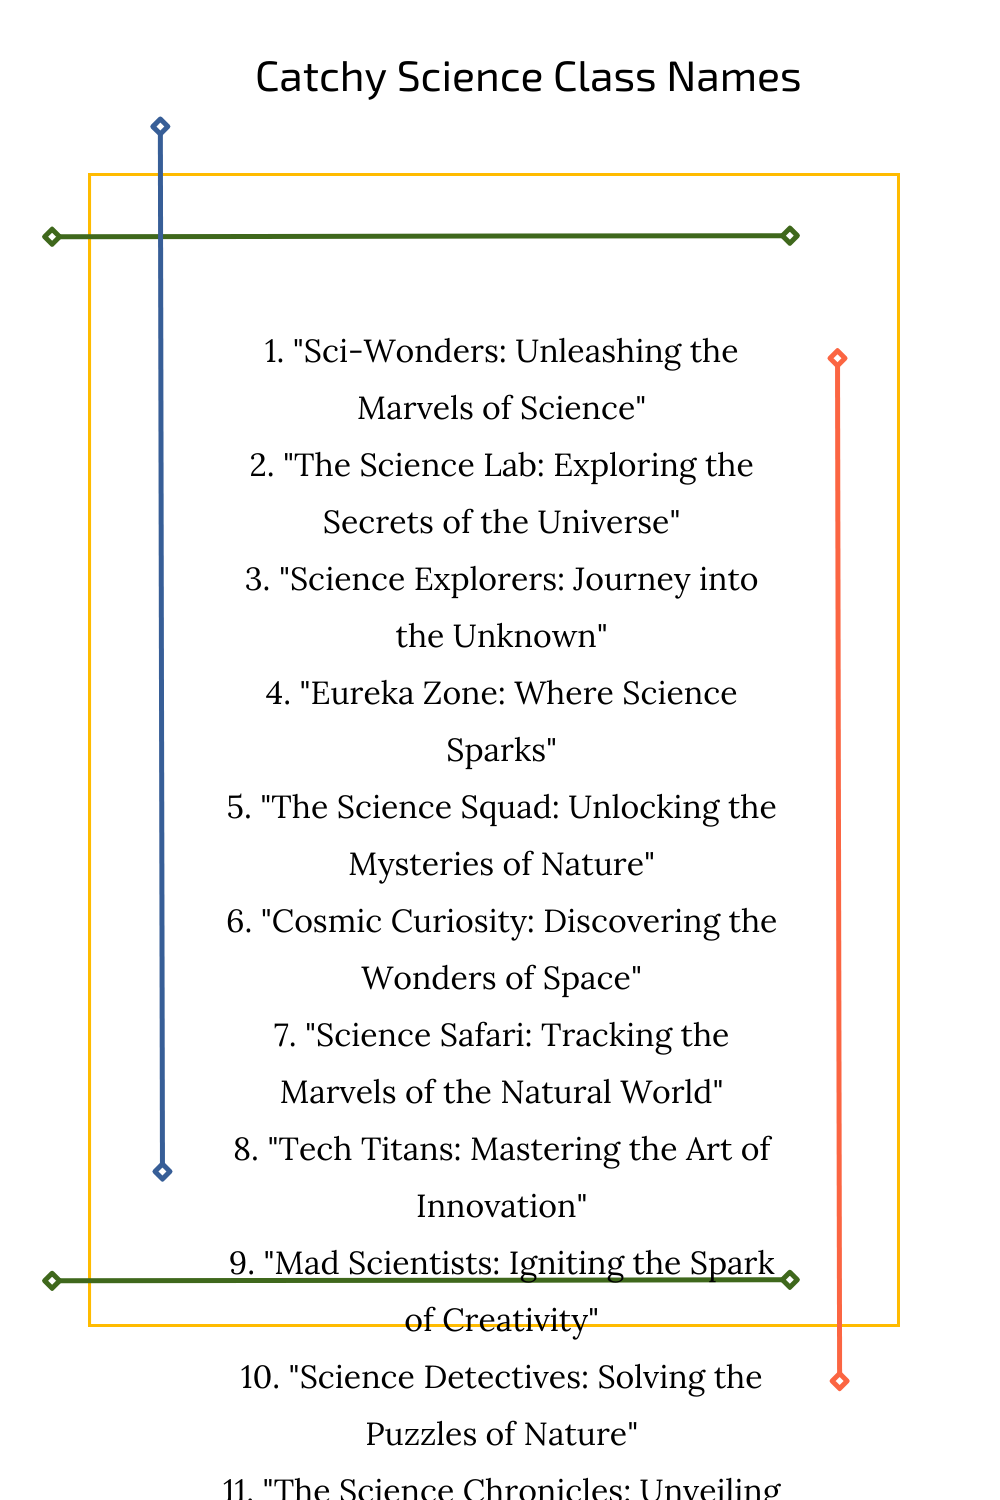 Catchy Science Class Names